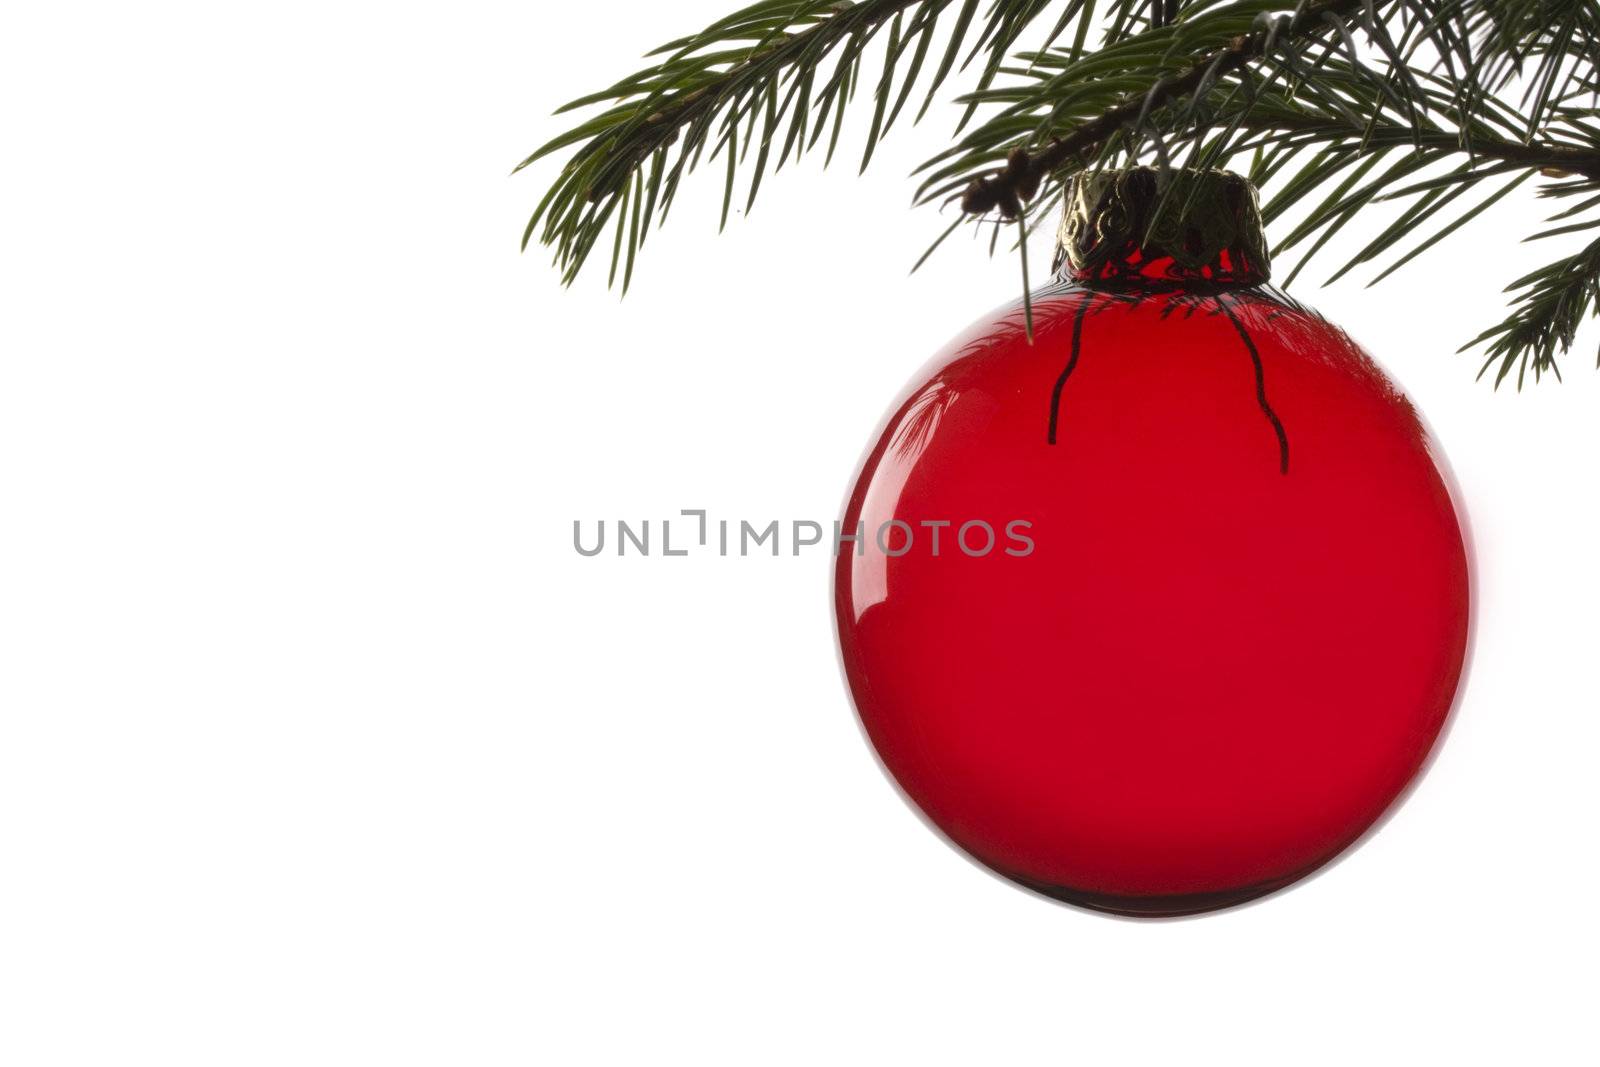 red christmas tree ball hanging from spruce leaf